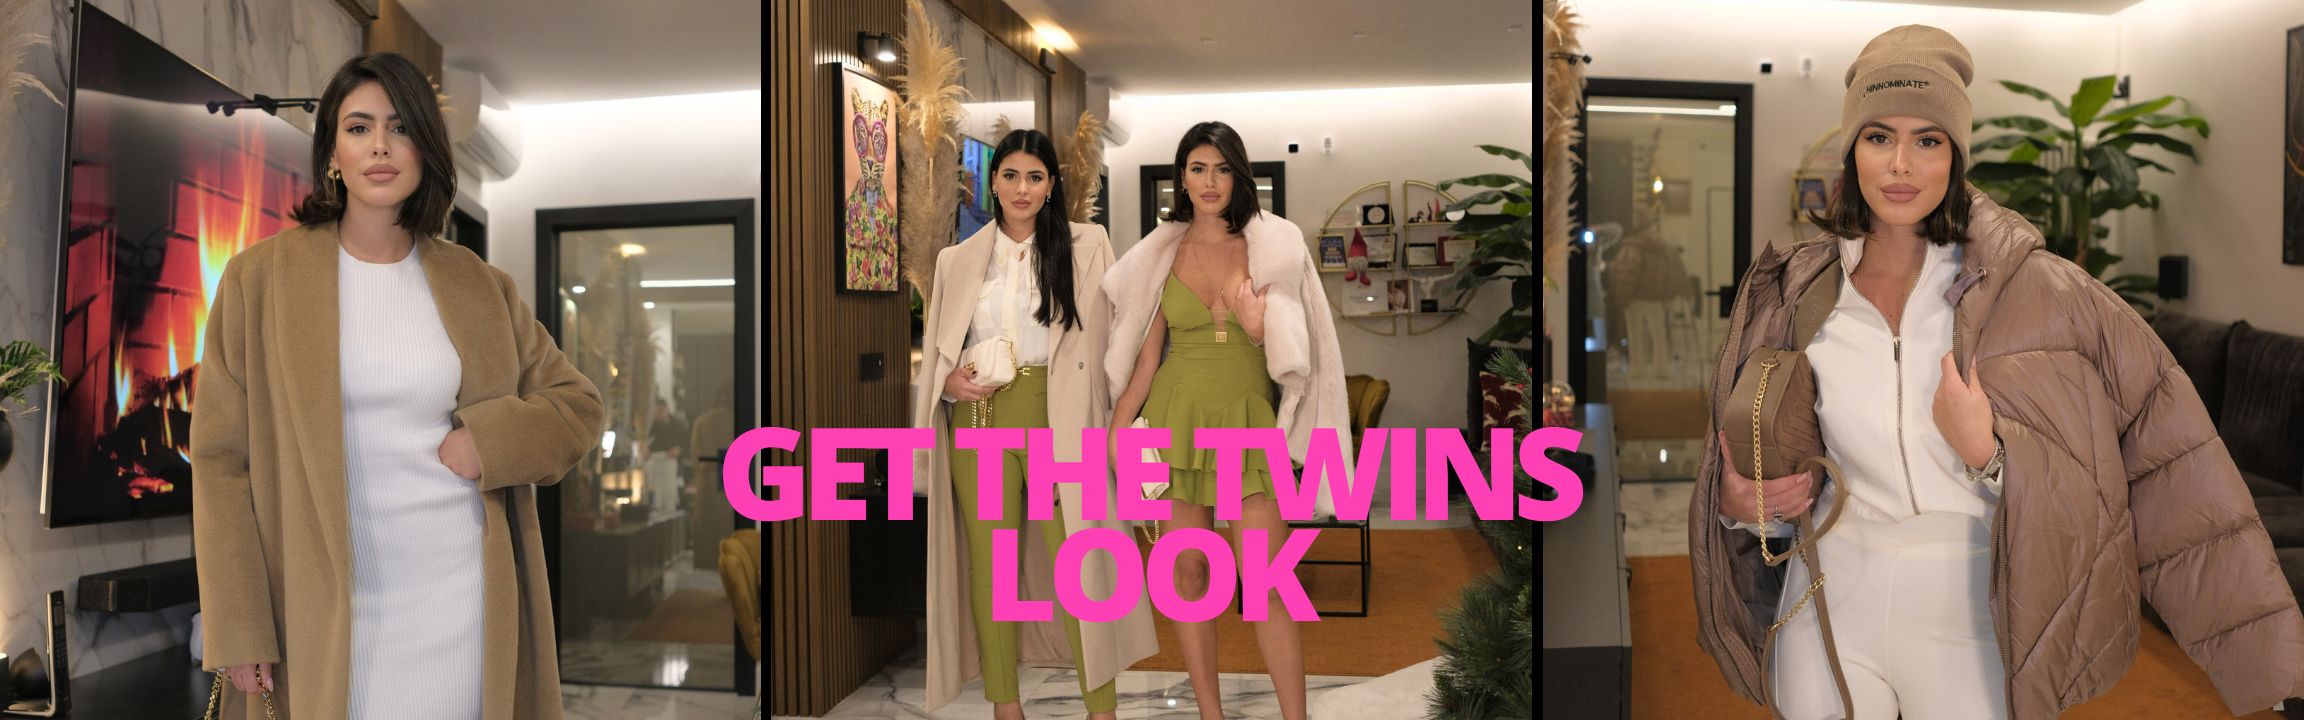 THE TWINS LOOK